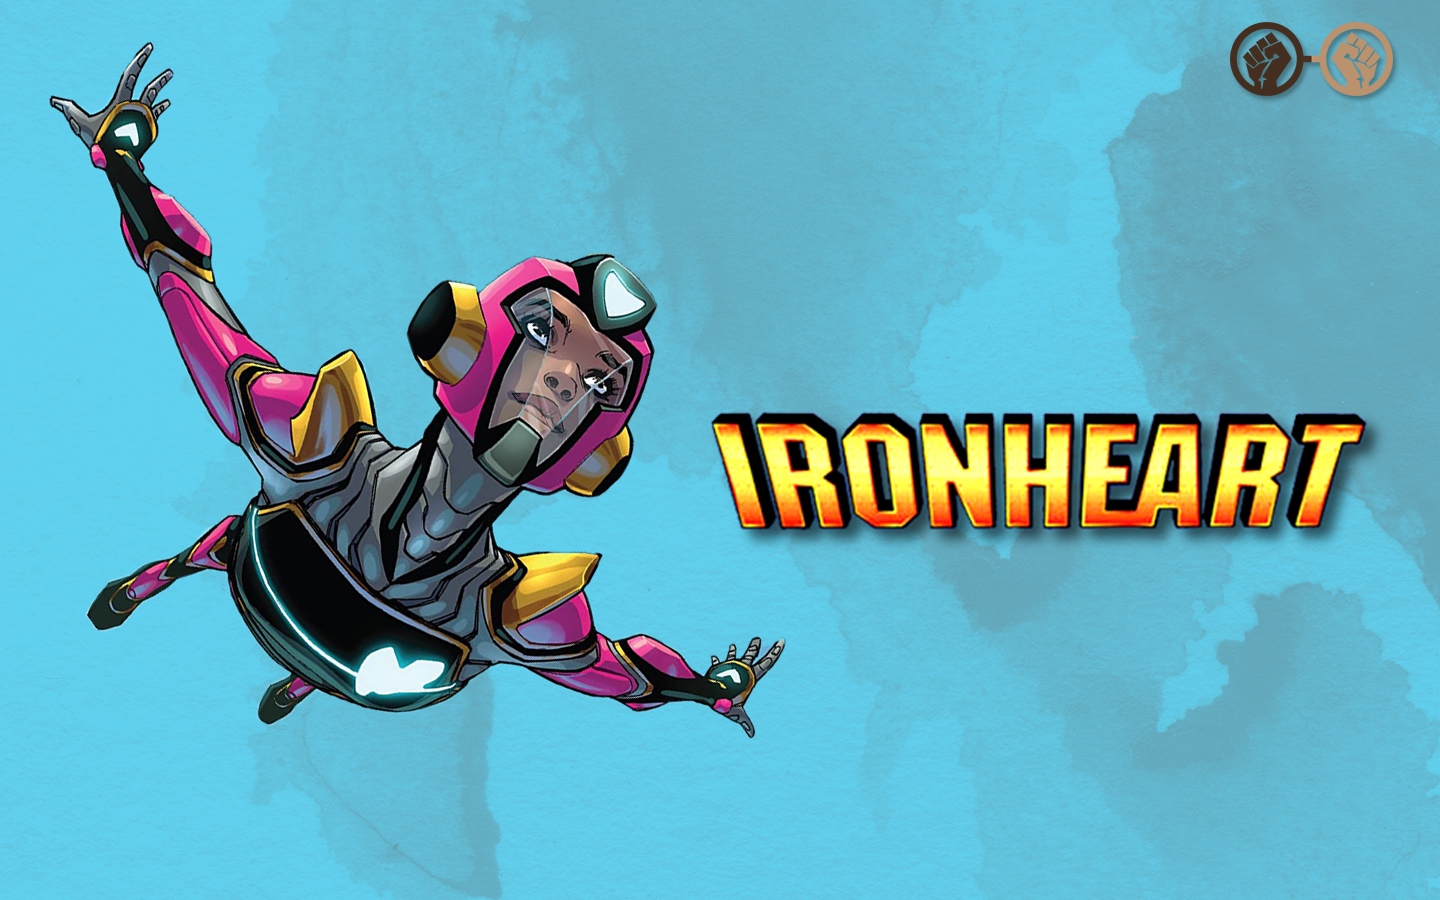 Fancast Friday: 5 Actresses We Want to See Play Riri Williams a.k.a. Ironheart